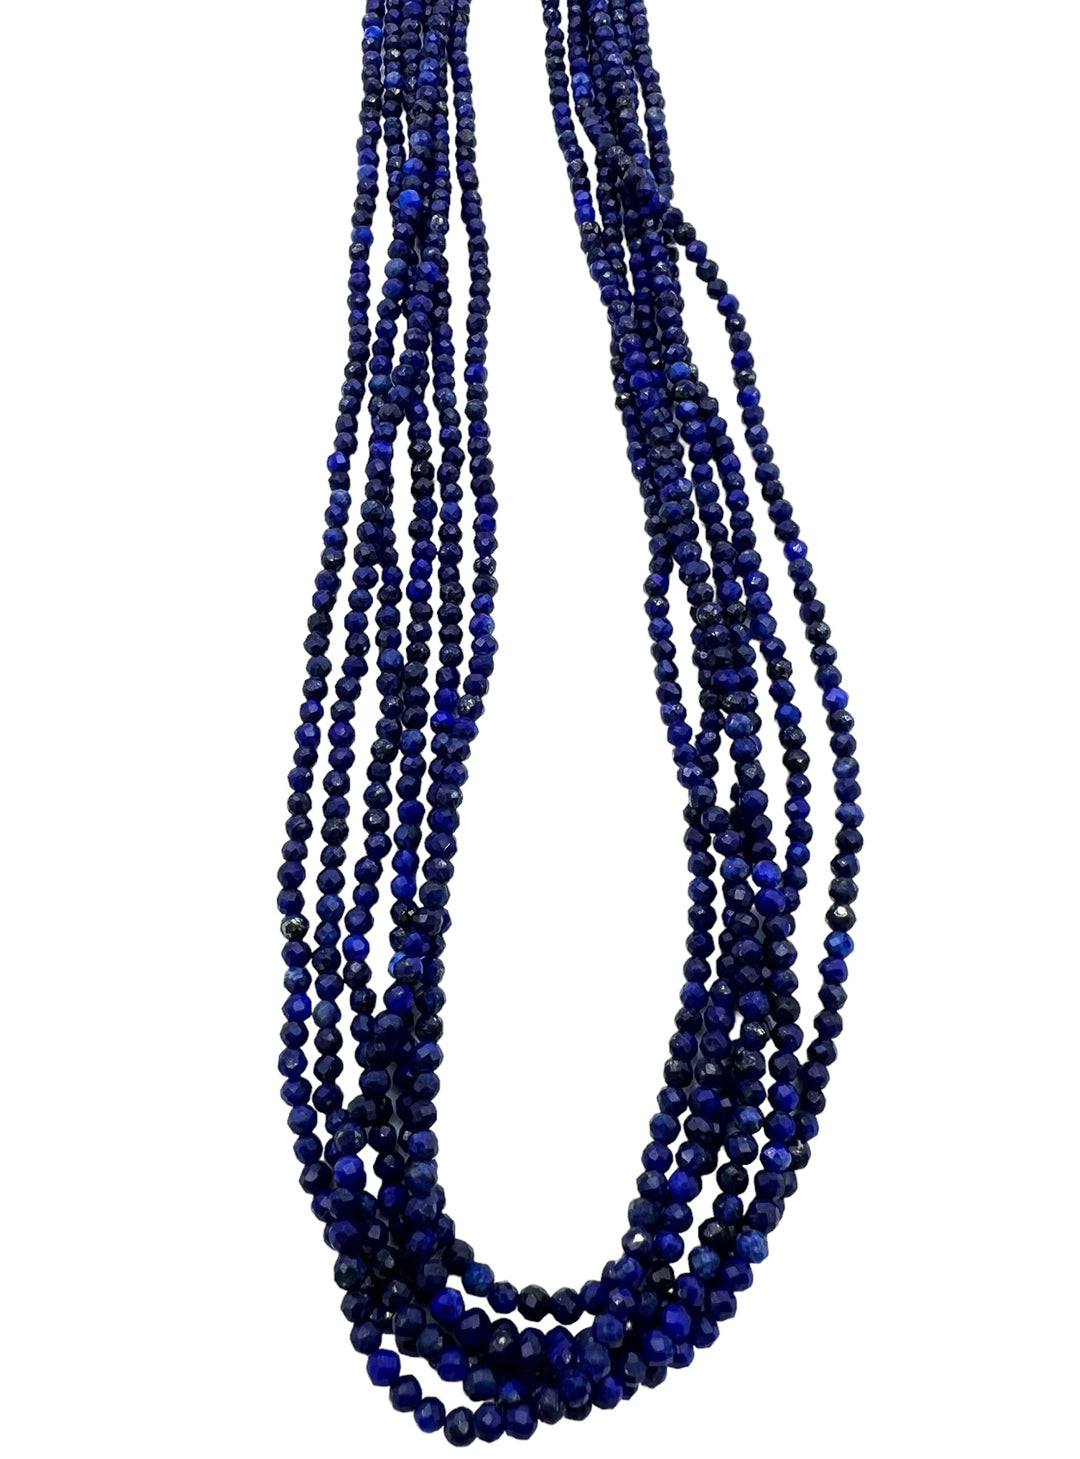 Deep Blue Lapis Lazuli Micro Faceted 2mm Round Beads 16 inch